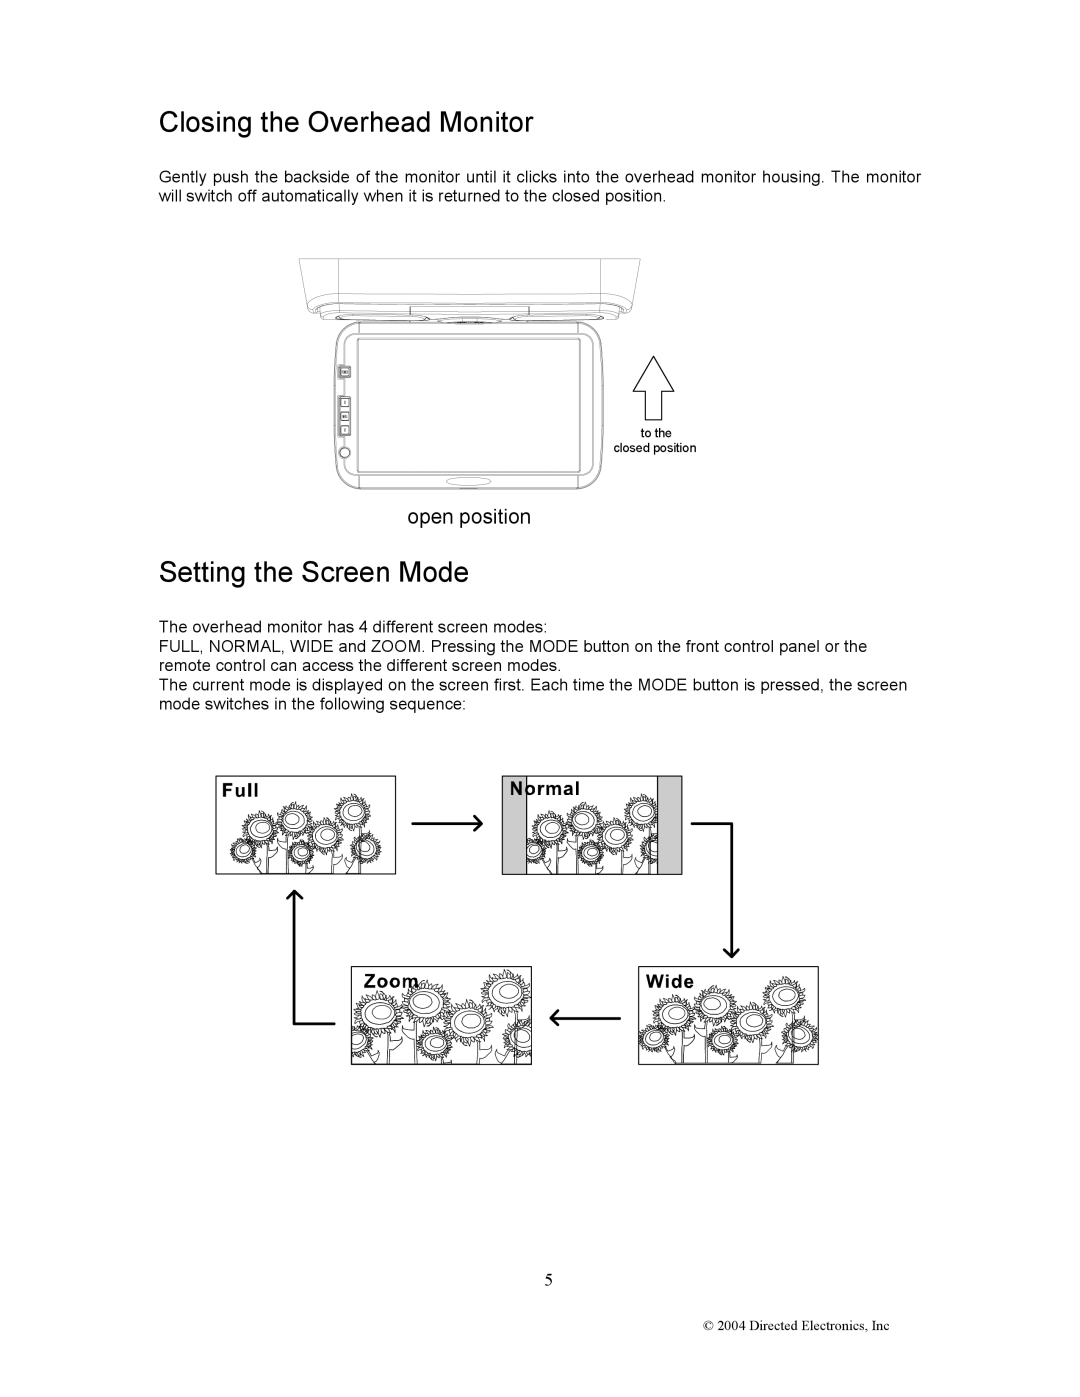 Directed Electronics OHD1502 manual Closing the Overhead Monitor, Setting the Screen Mode 